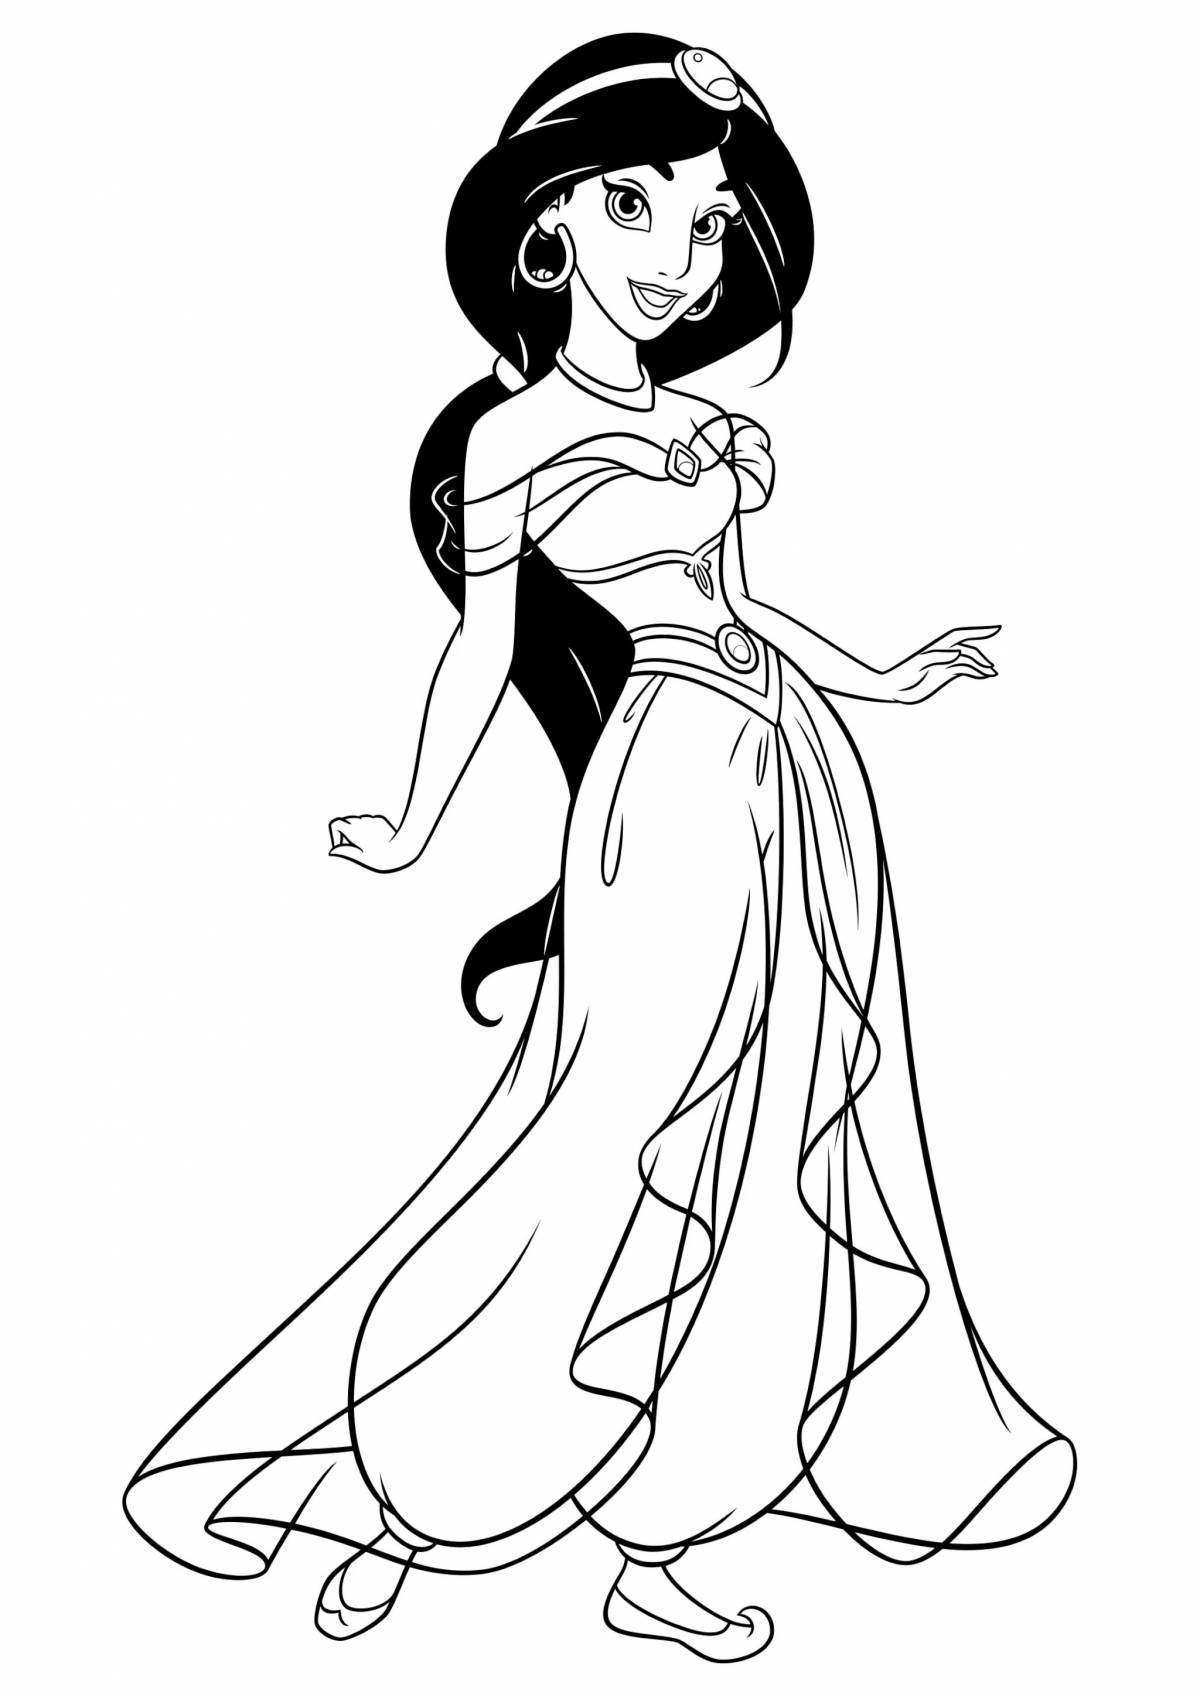 Exquisite jasmine coloring pages